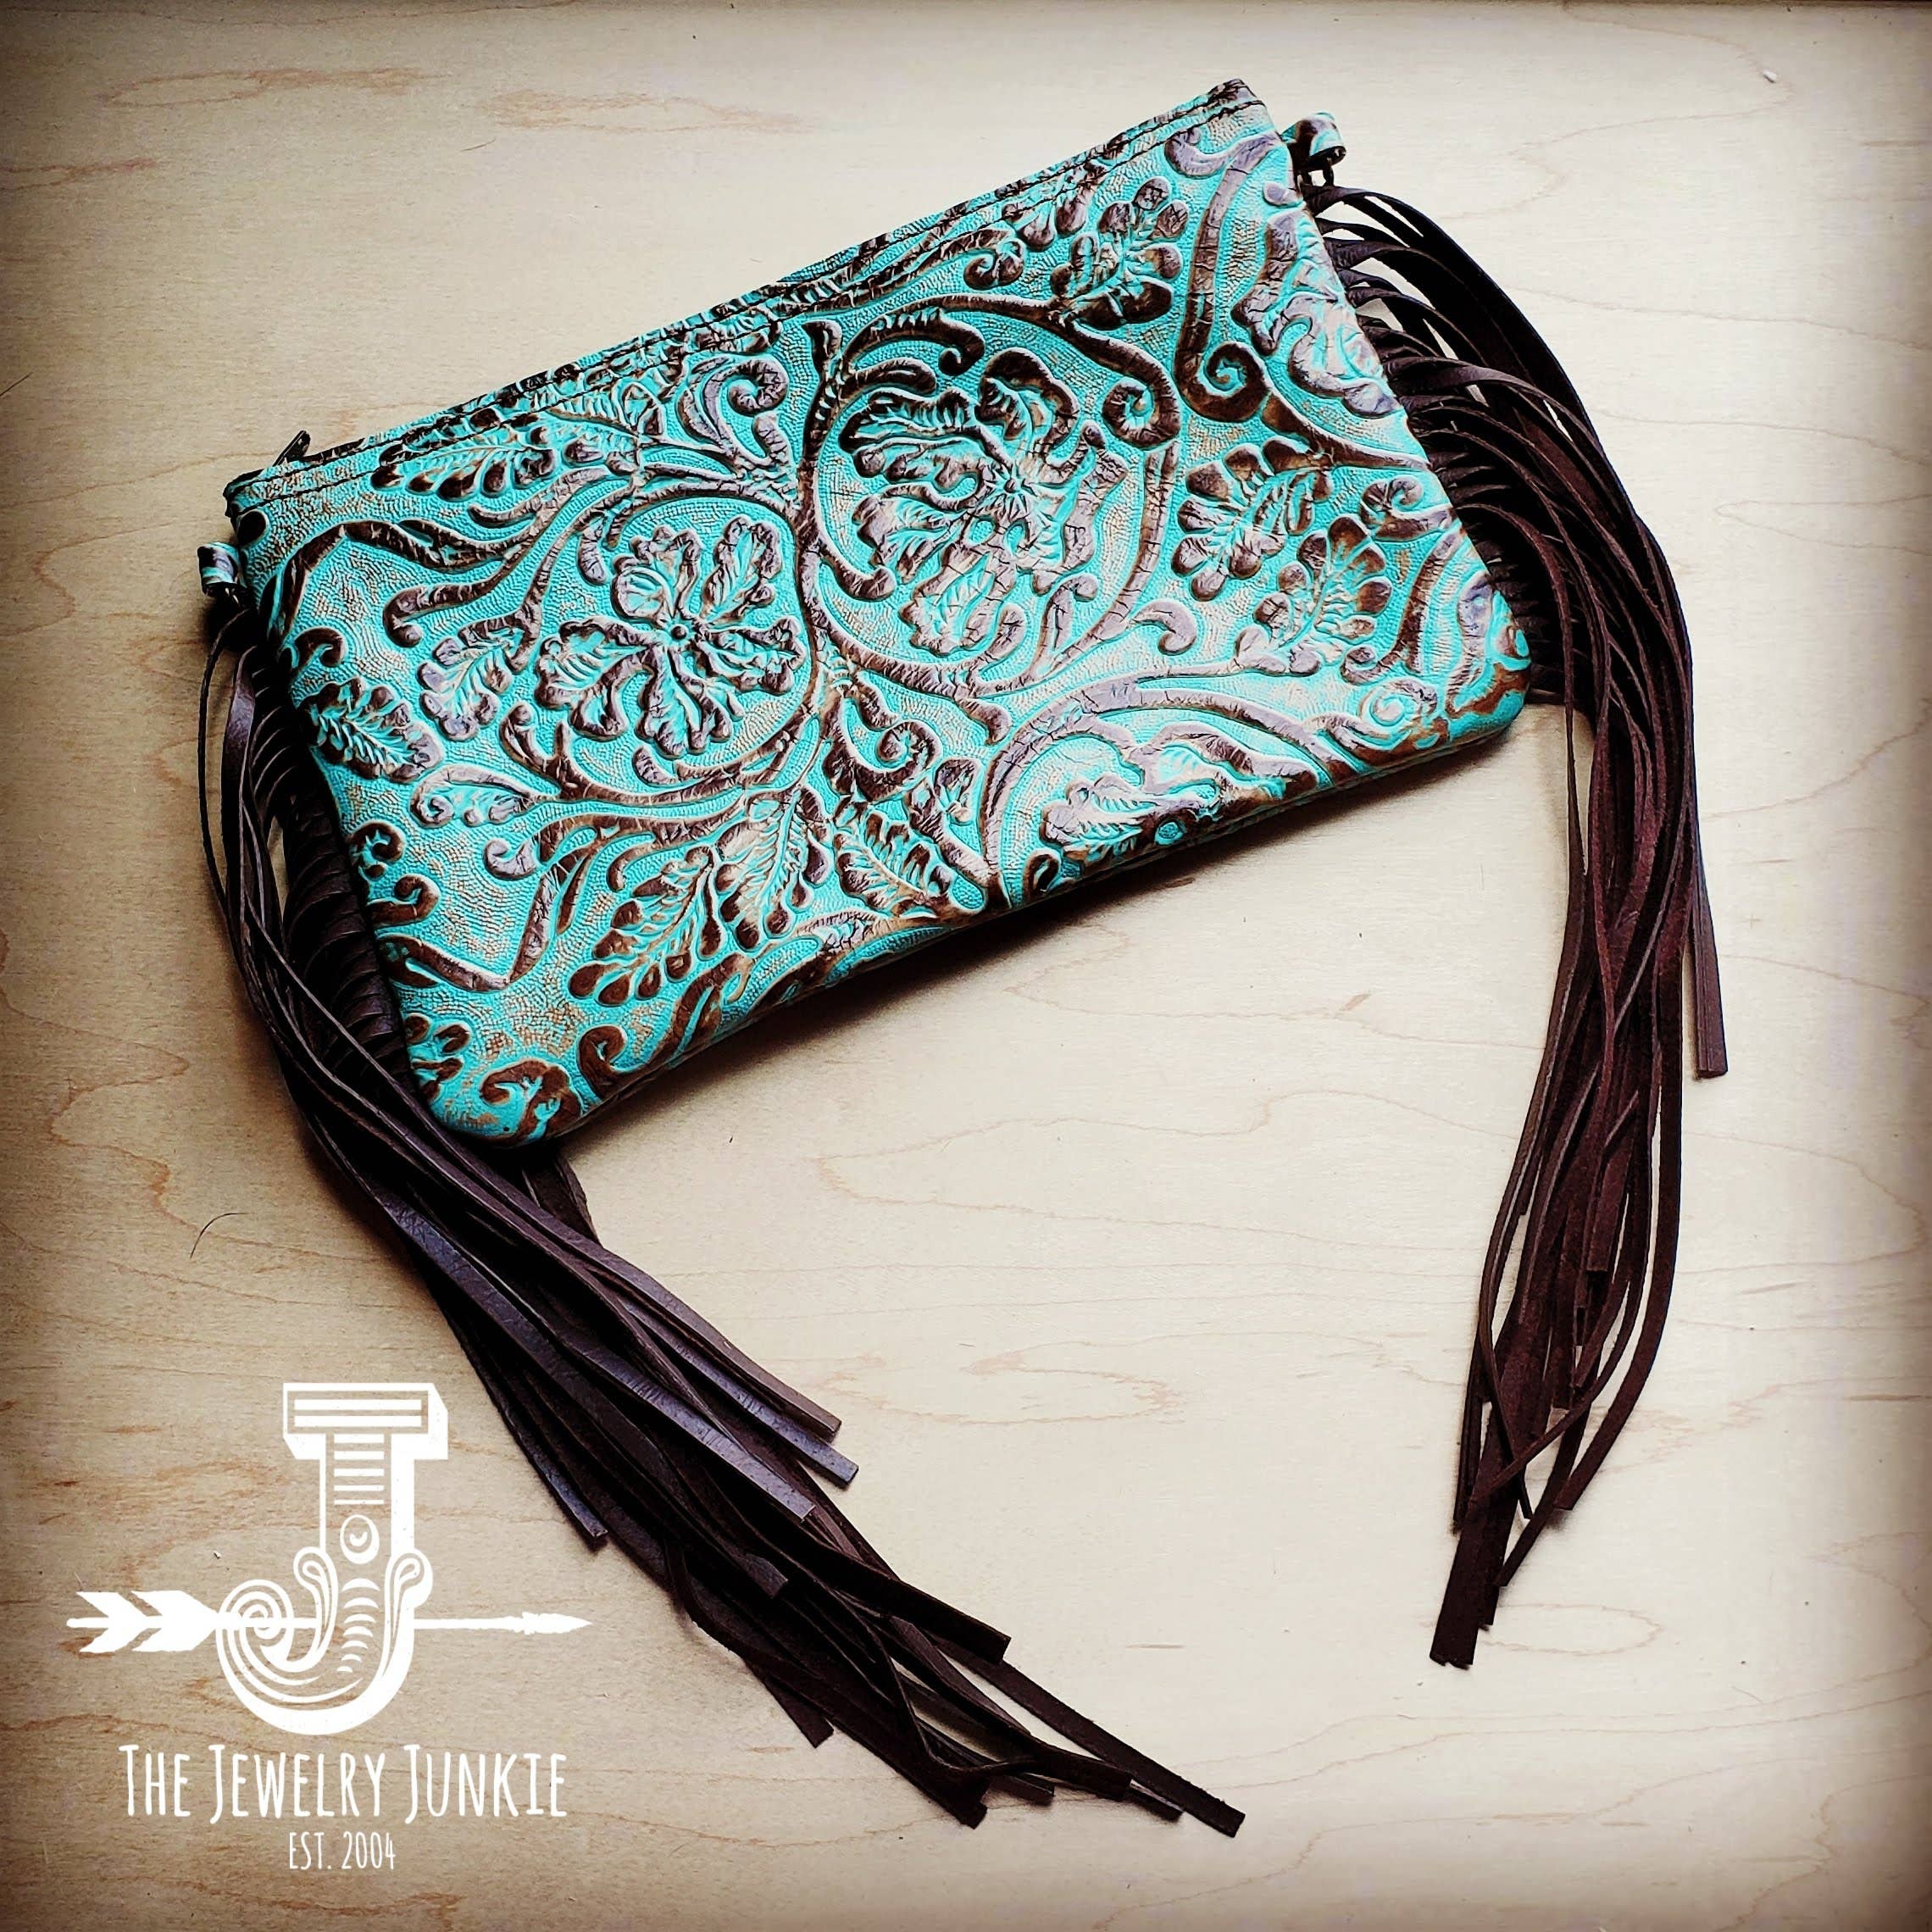 Embossed Cowboy Turquoise Leather Clutch Handbag - Forever Western Boutique